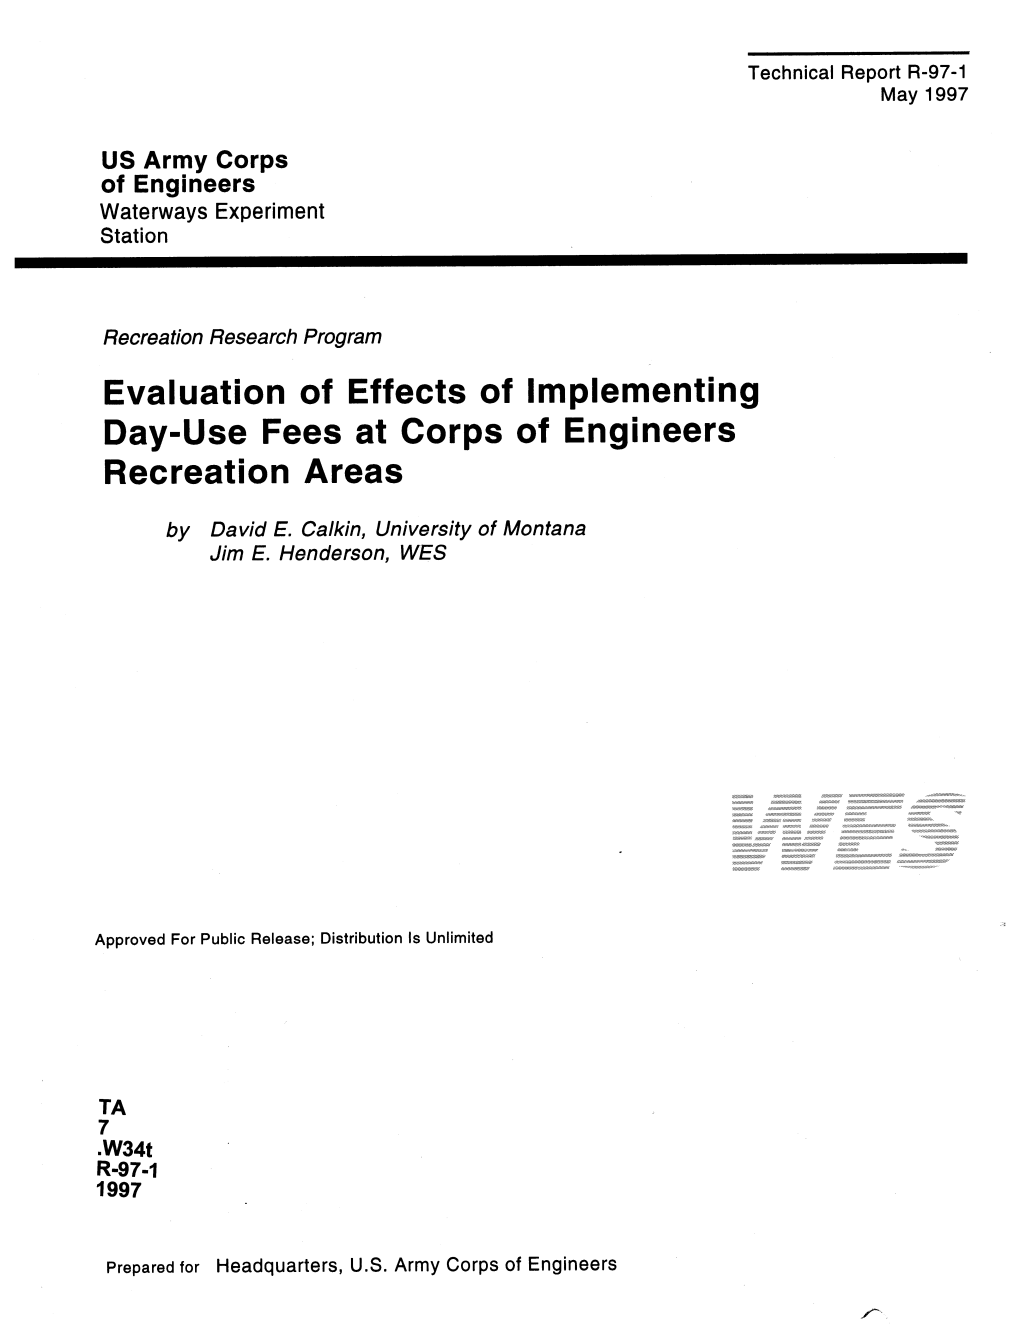 Evaluation of Effects of Implementing Day-Use Fees at Corps of Engineers Recreation Areas